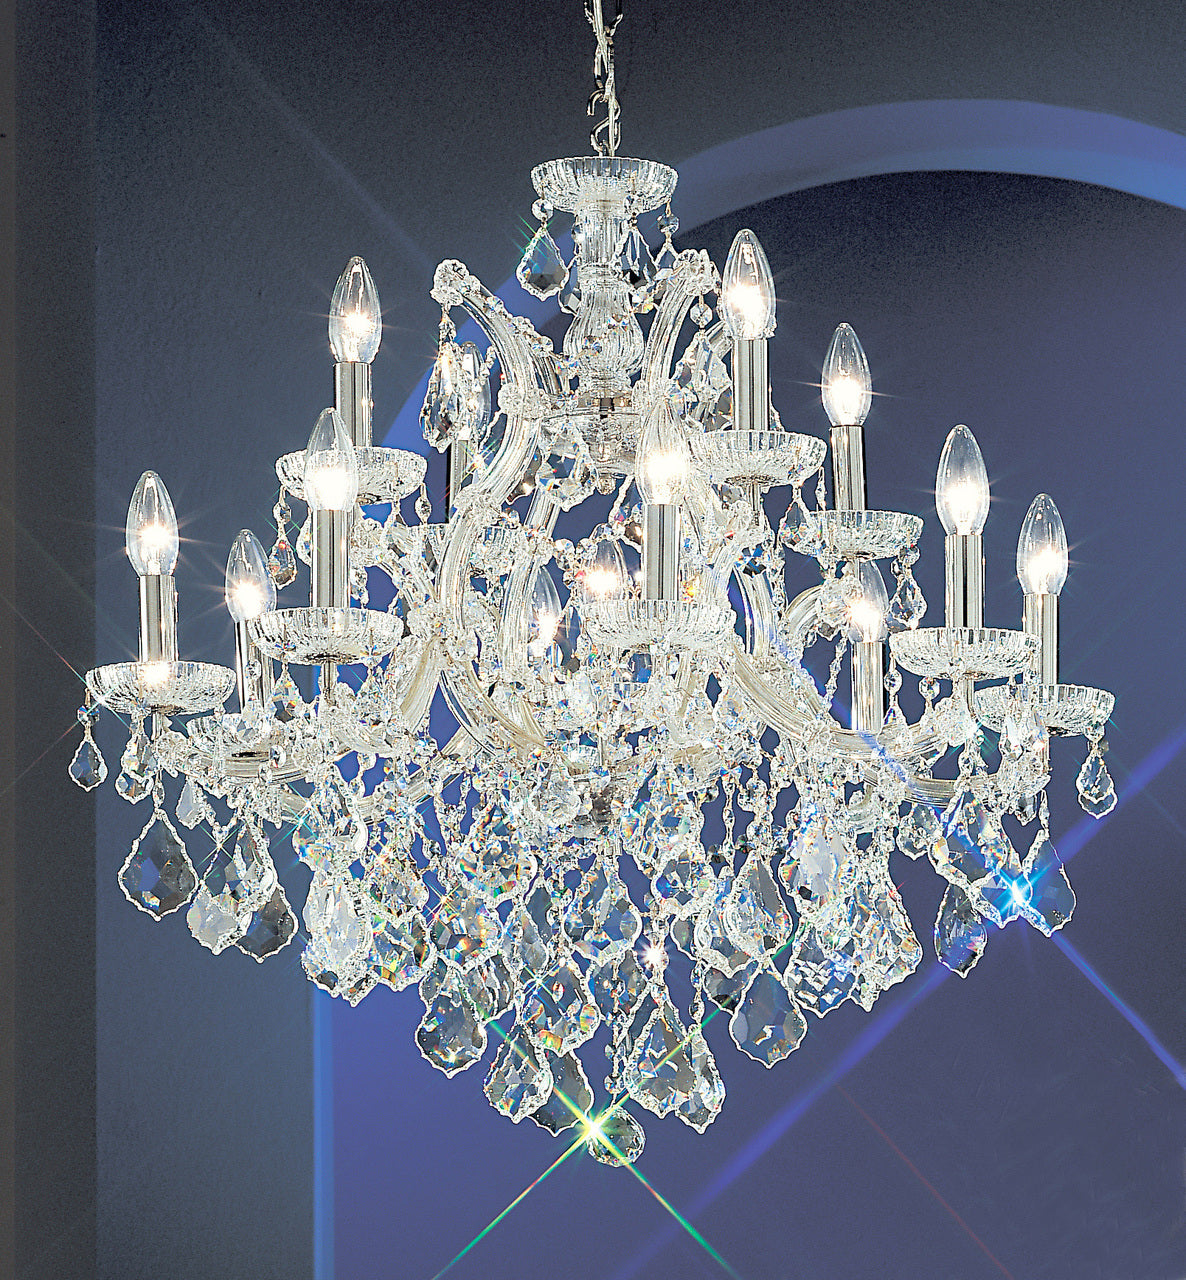 Classic Lighting 8133 CH C Maria Theresa Traditional Crystal Chandelier in Chrome (Imported from Italy)